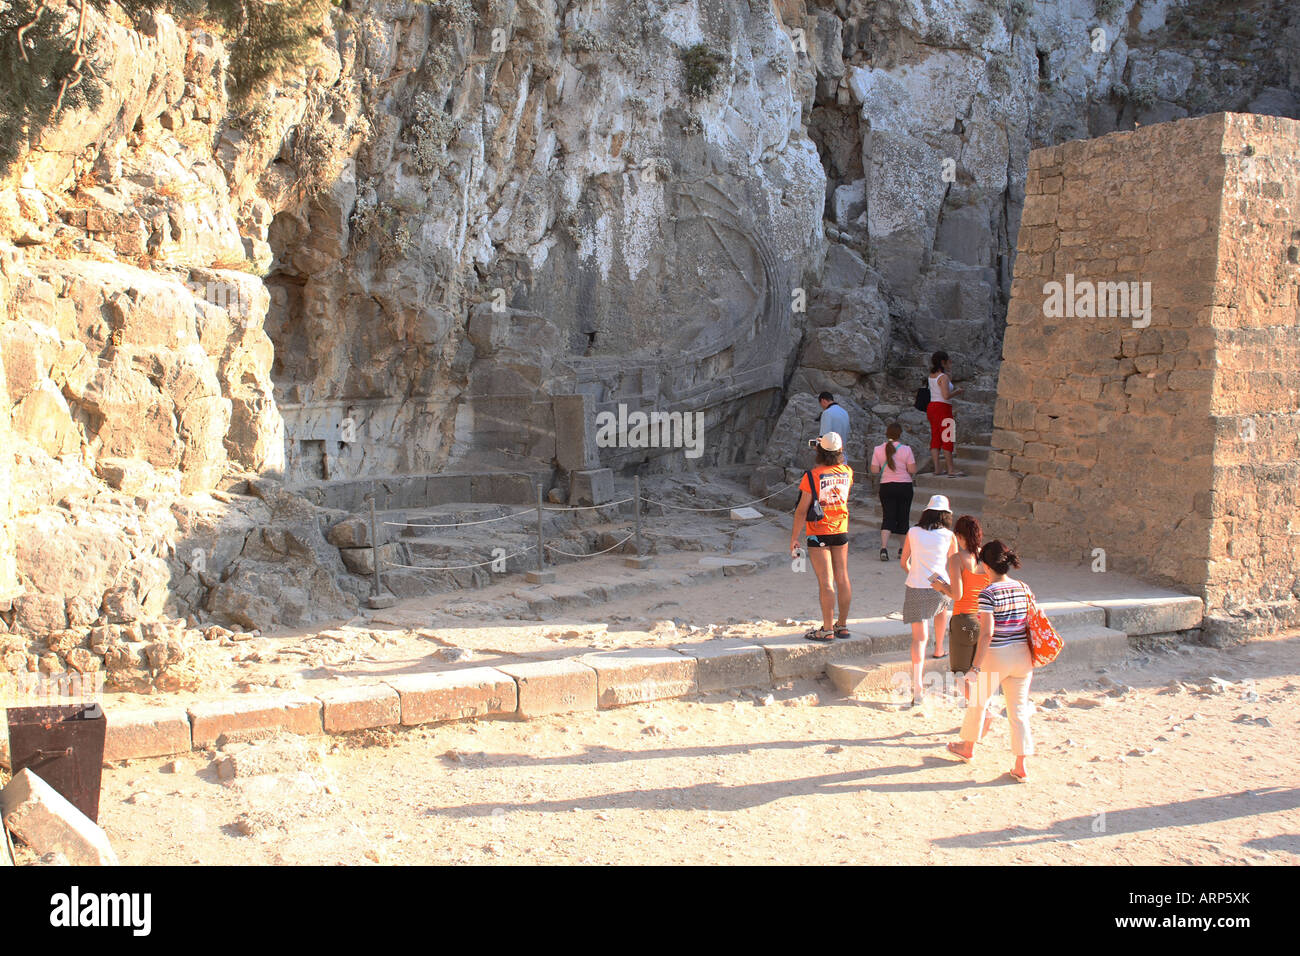 Tourist pass the ship carved out of the rock face at the accent of The Acropolis Lindos Rhodes Island Greece Stock Photo